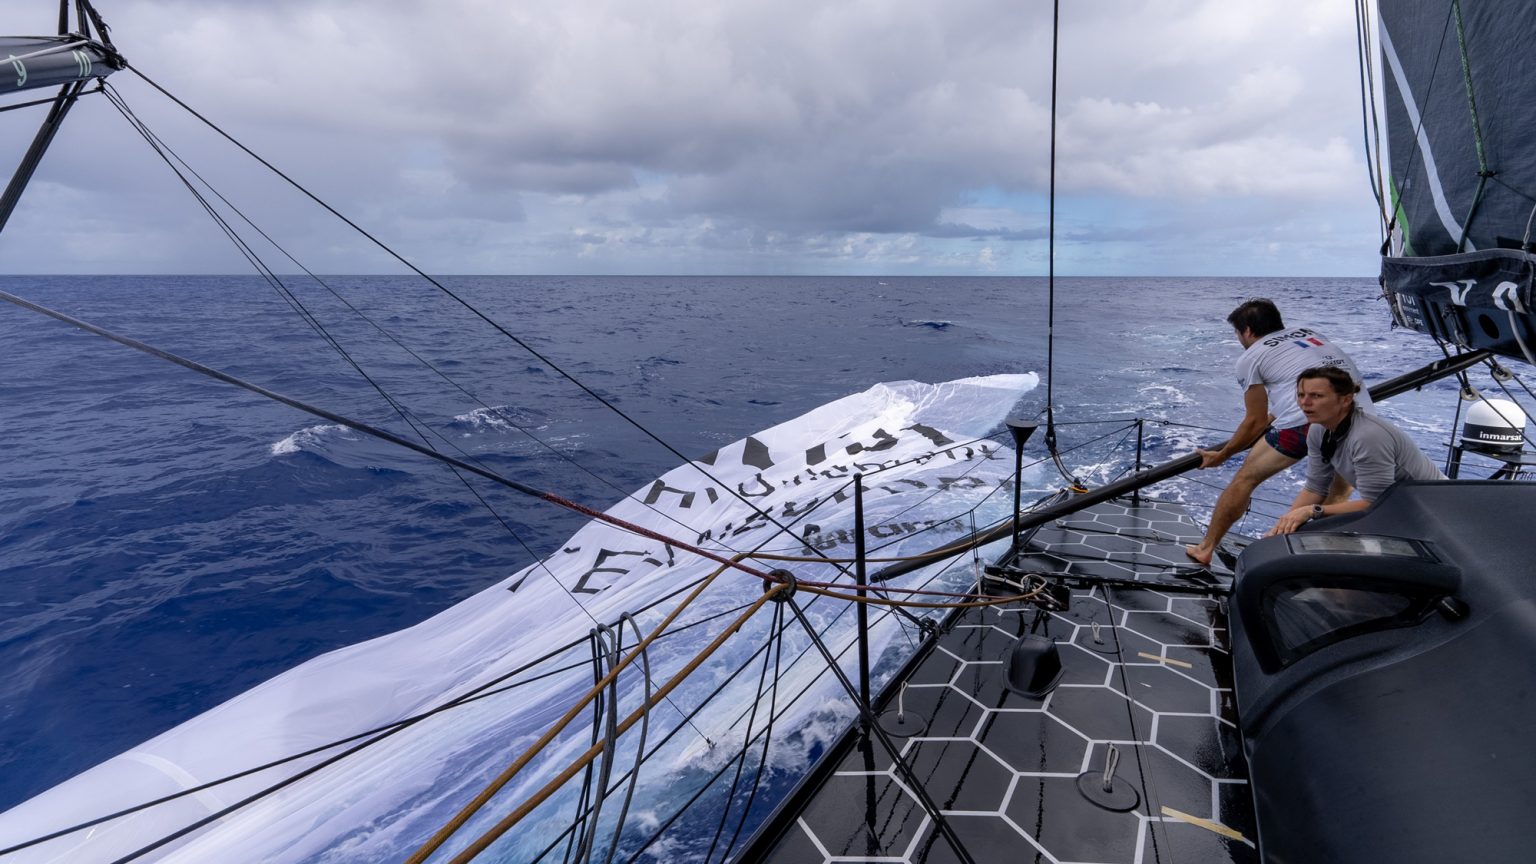 The Ocean Race: 11th Hour Racing into the lead